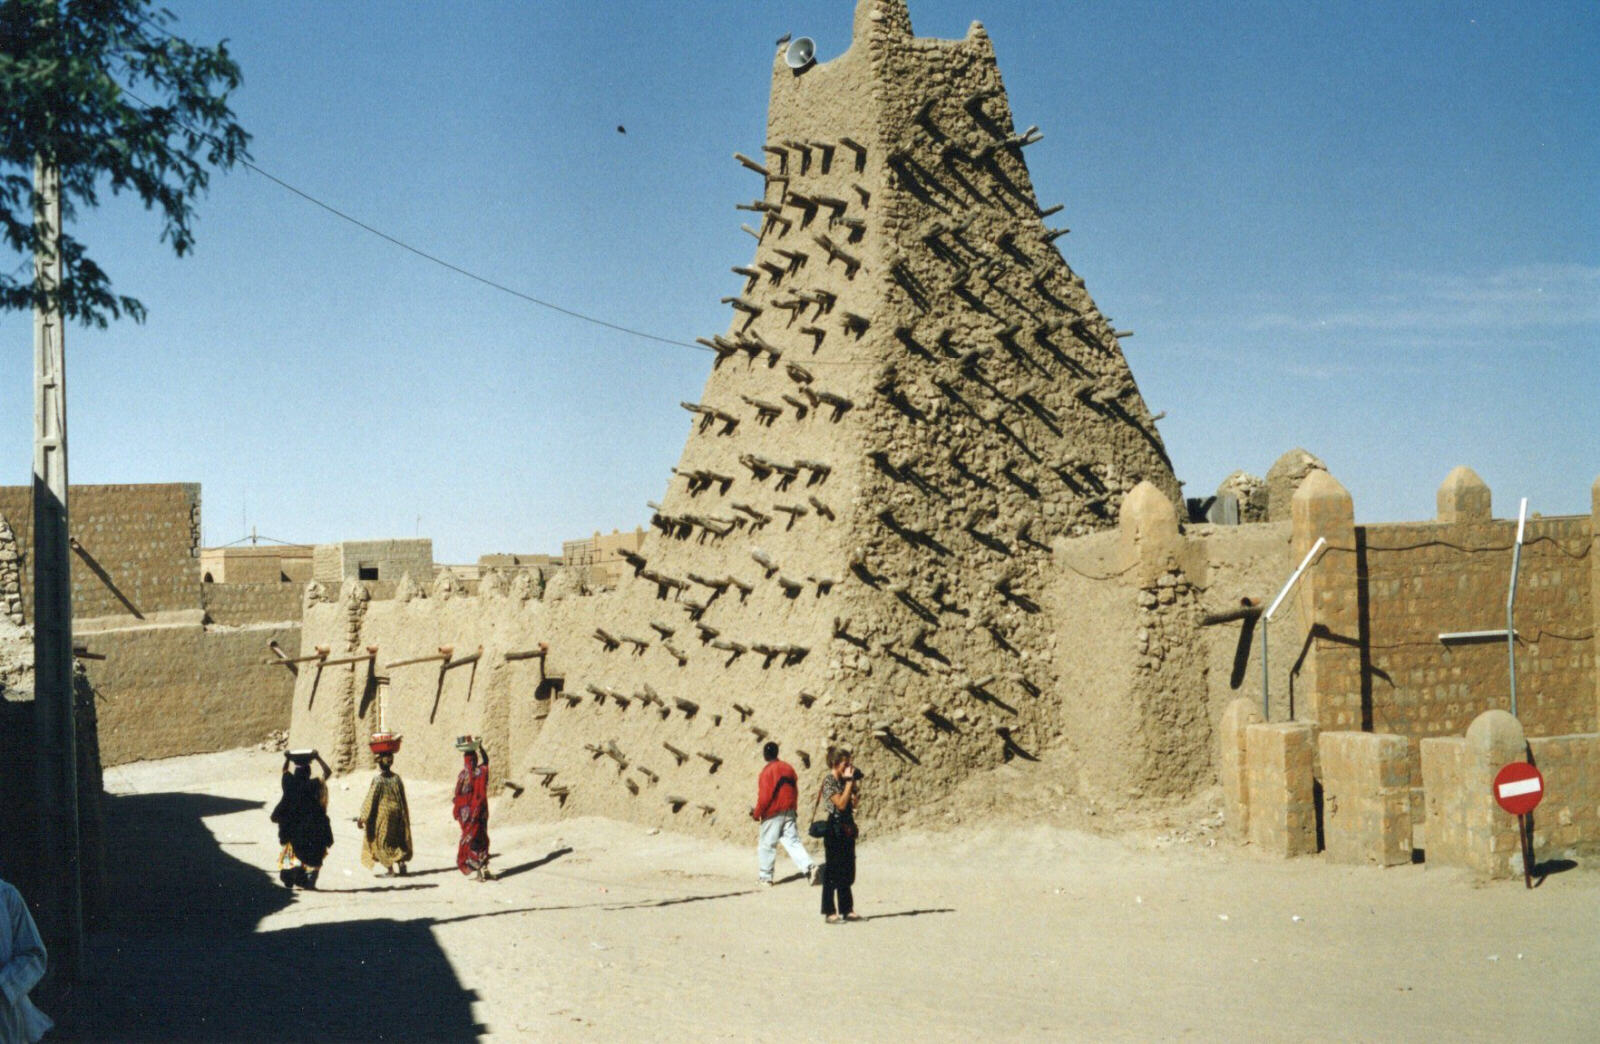 The historic Sankore mosque in Timbuktu